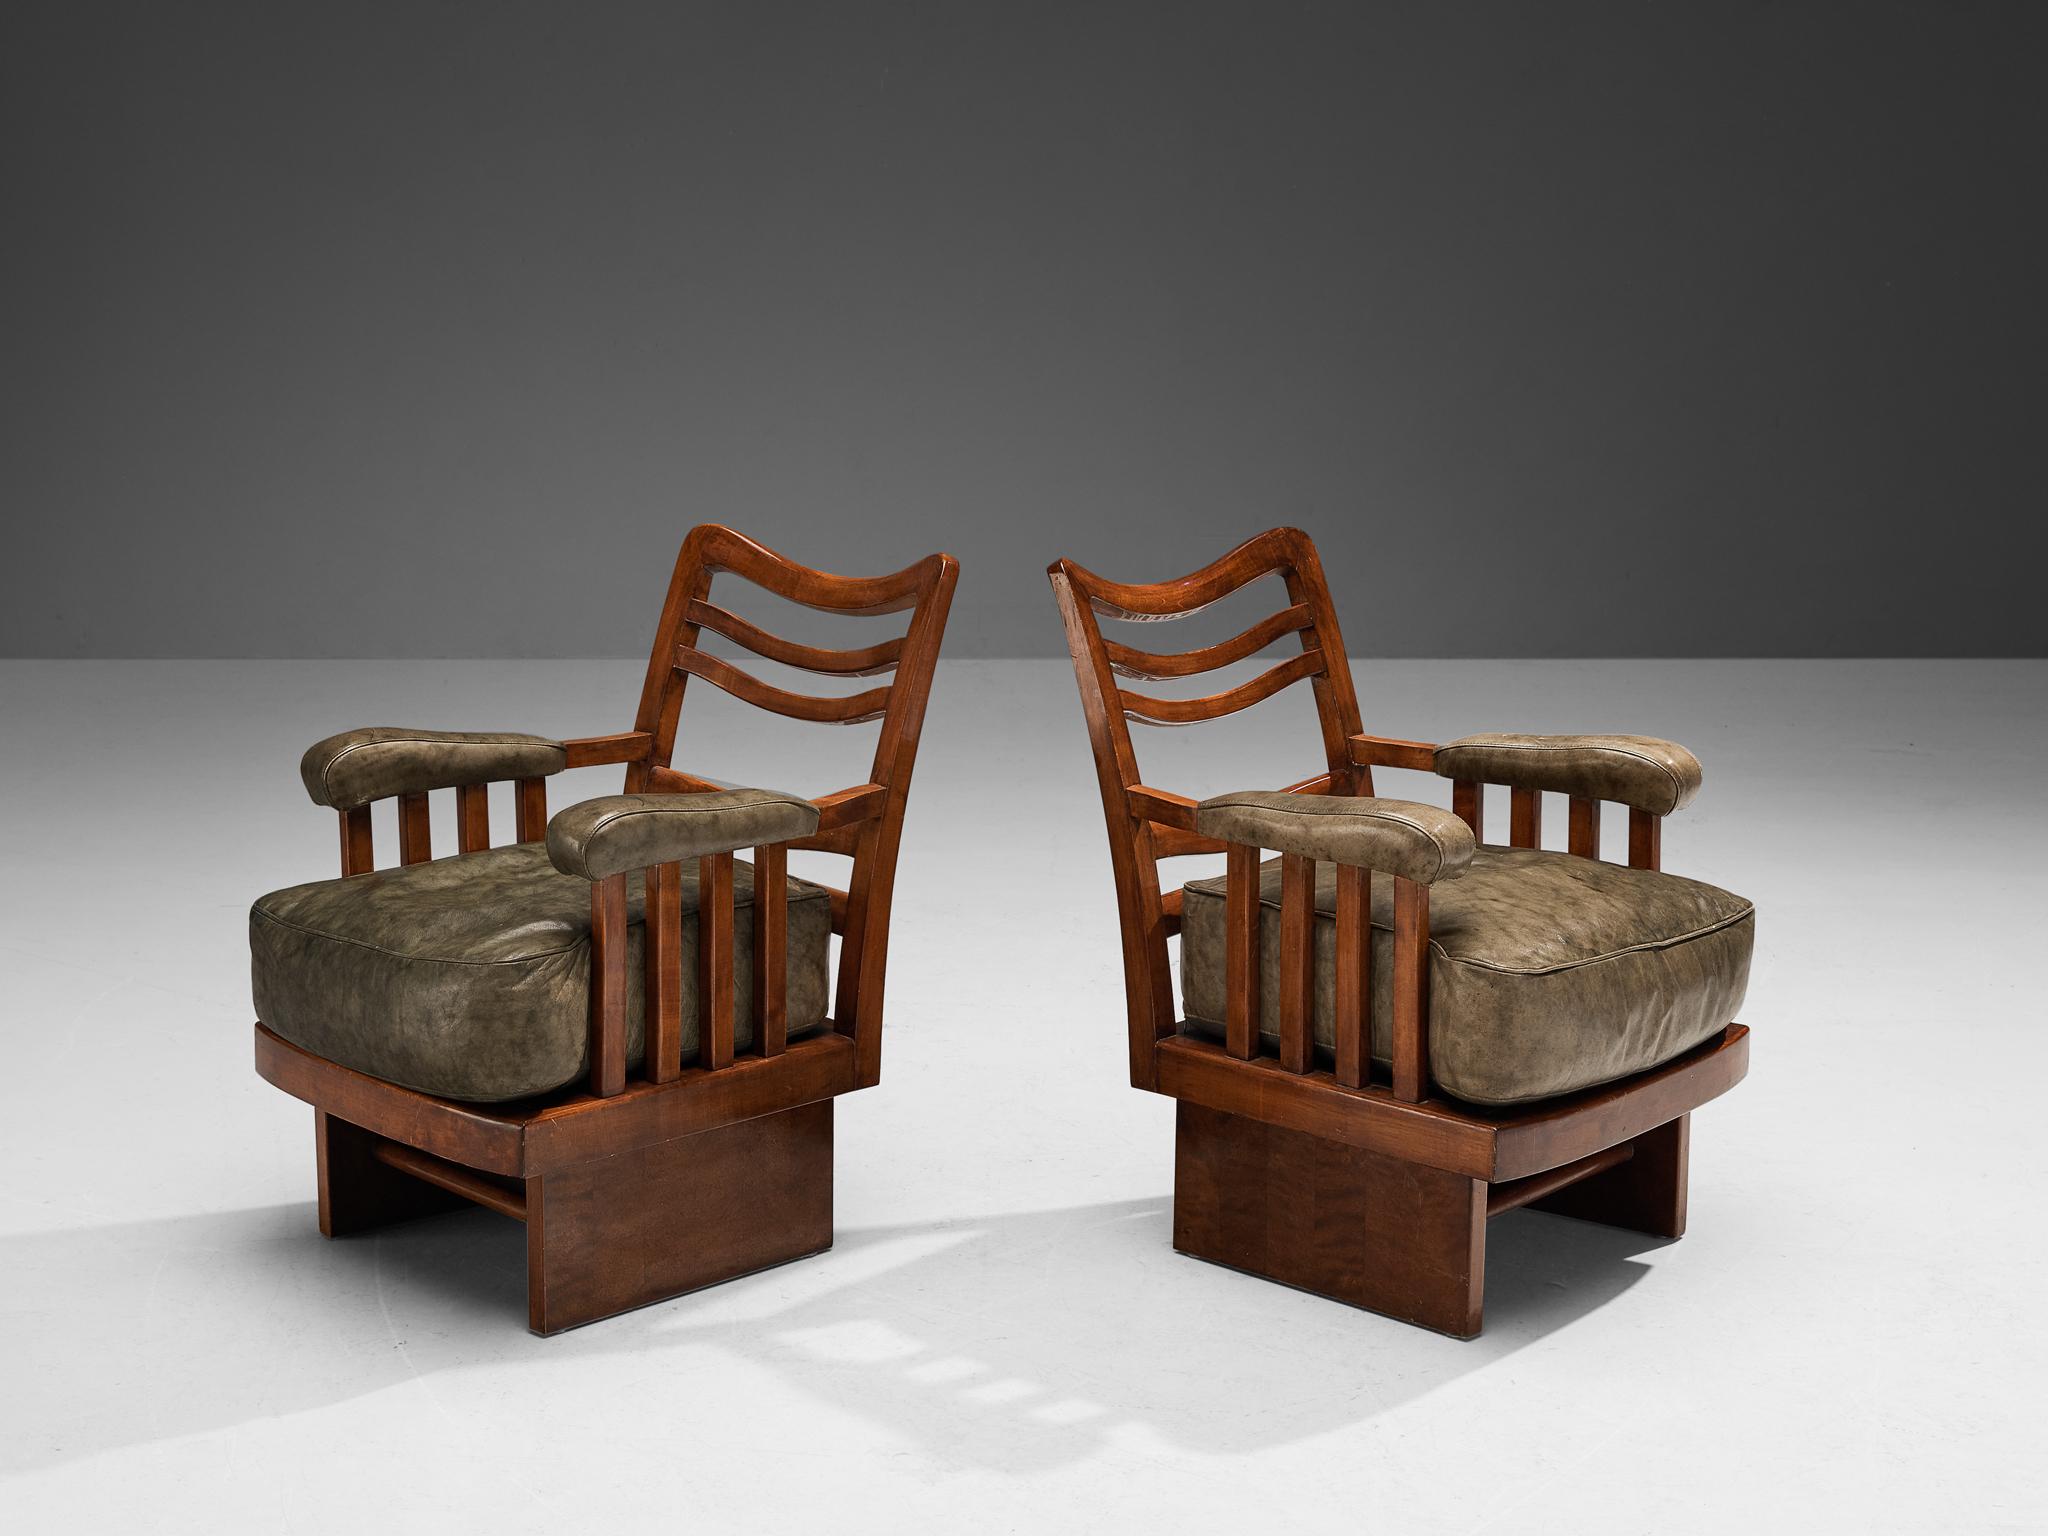 Vittorio Valabrega, pair of lounge chairs, walnut, leather, 1928

Wonderful pair of lounge chairs designed by Vittorio Valabrega. The backrests of these chairs have elegantly waved slats of walnut wood, together with the laddered slats under the